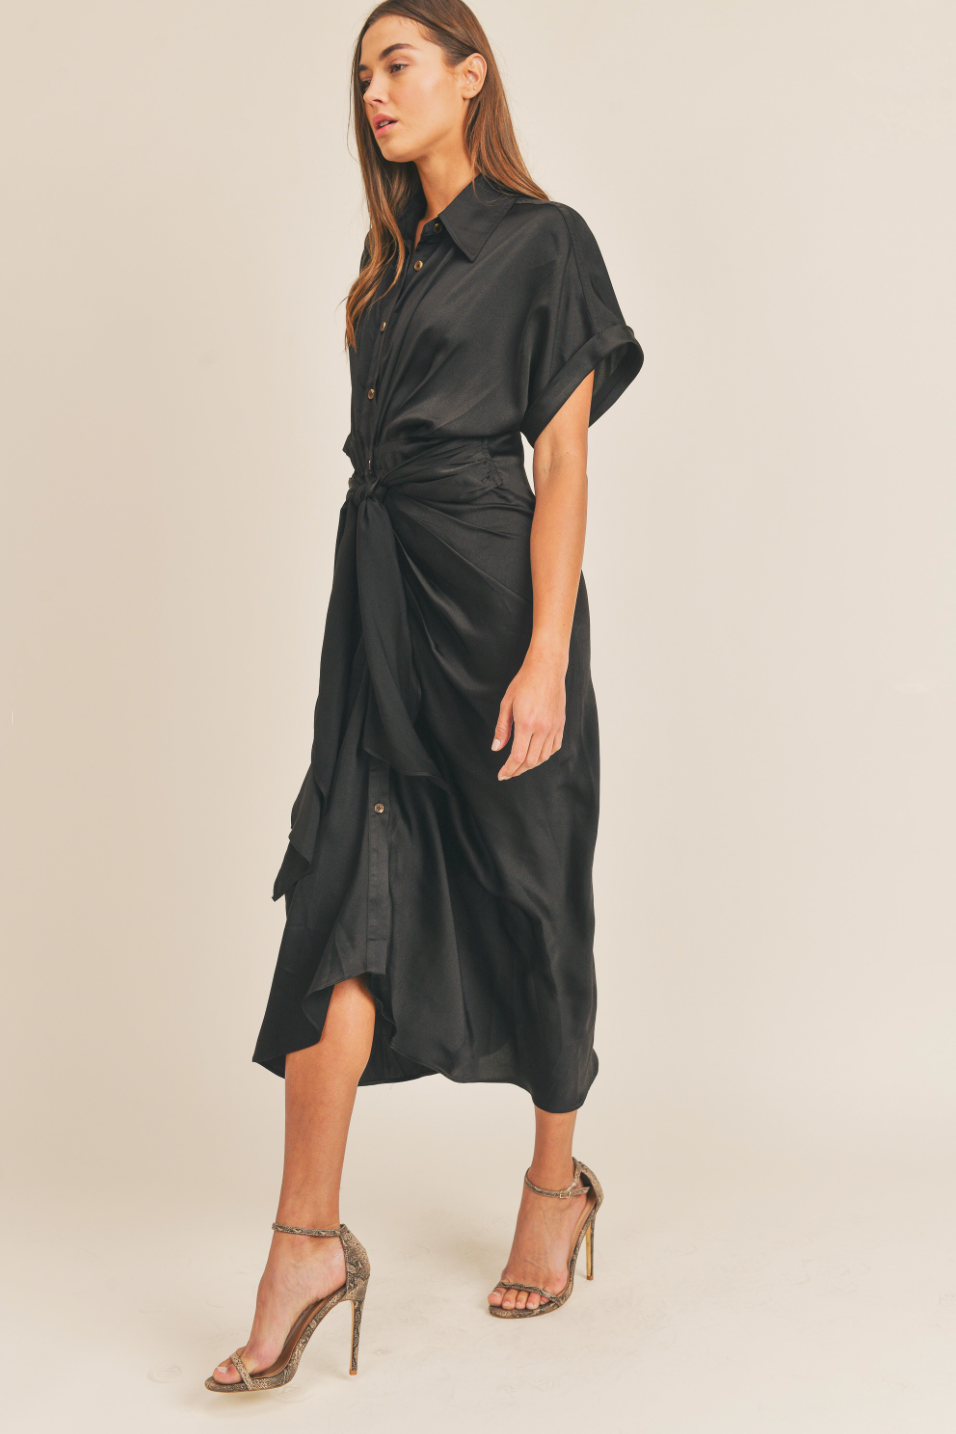 Load image into Gallery viewer, Glow Fashion Boutique Black Satin Dress
